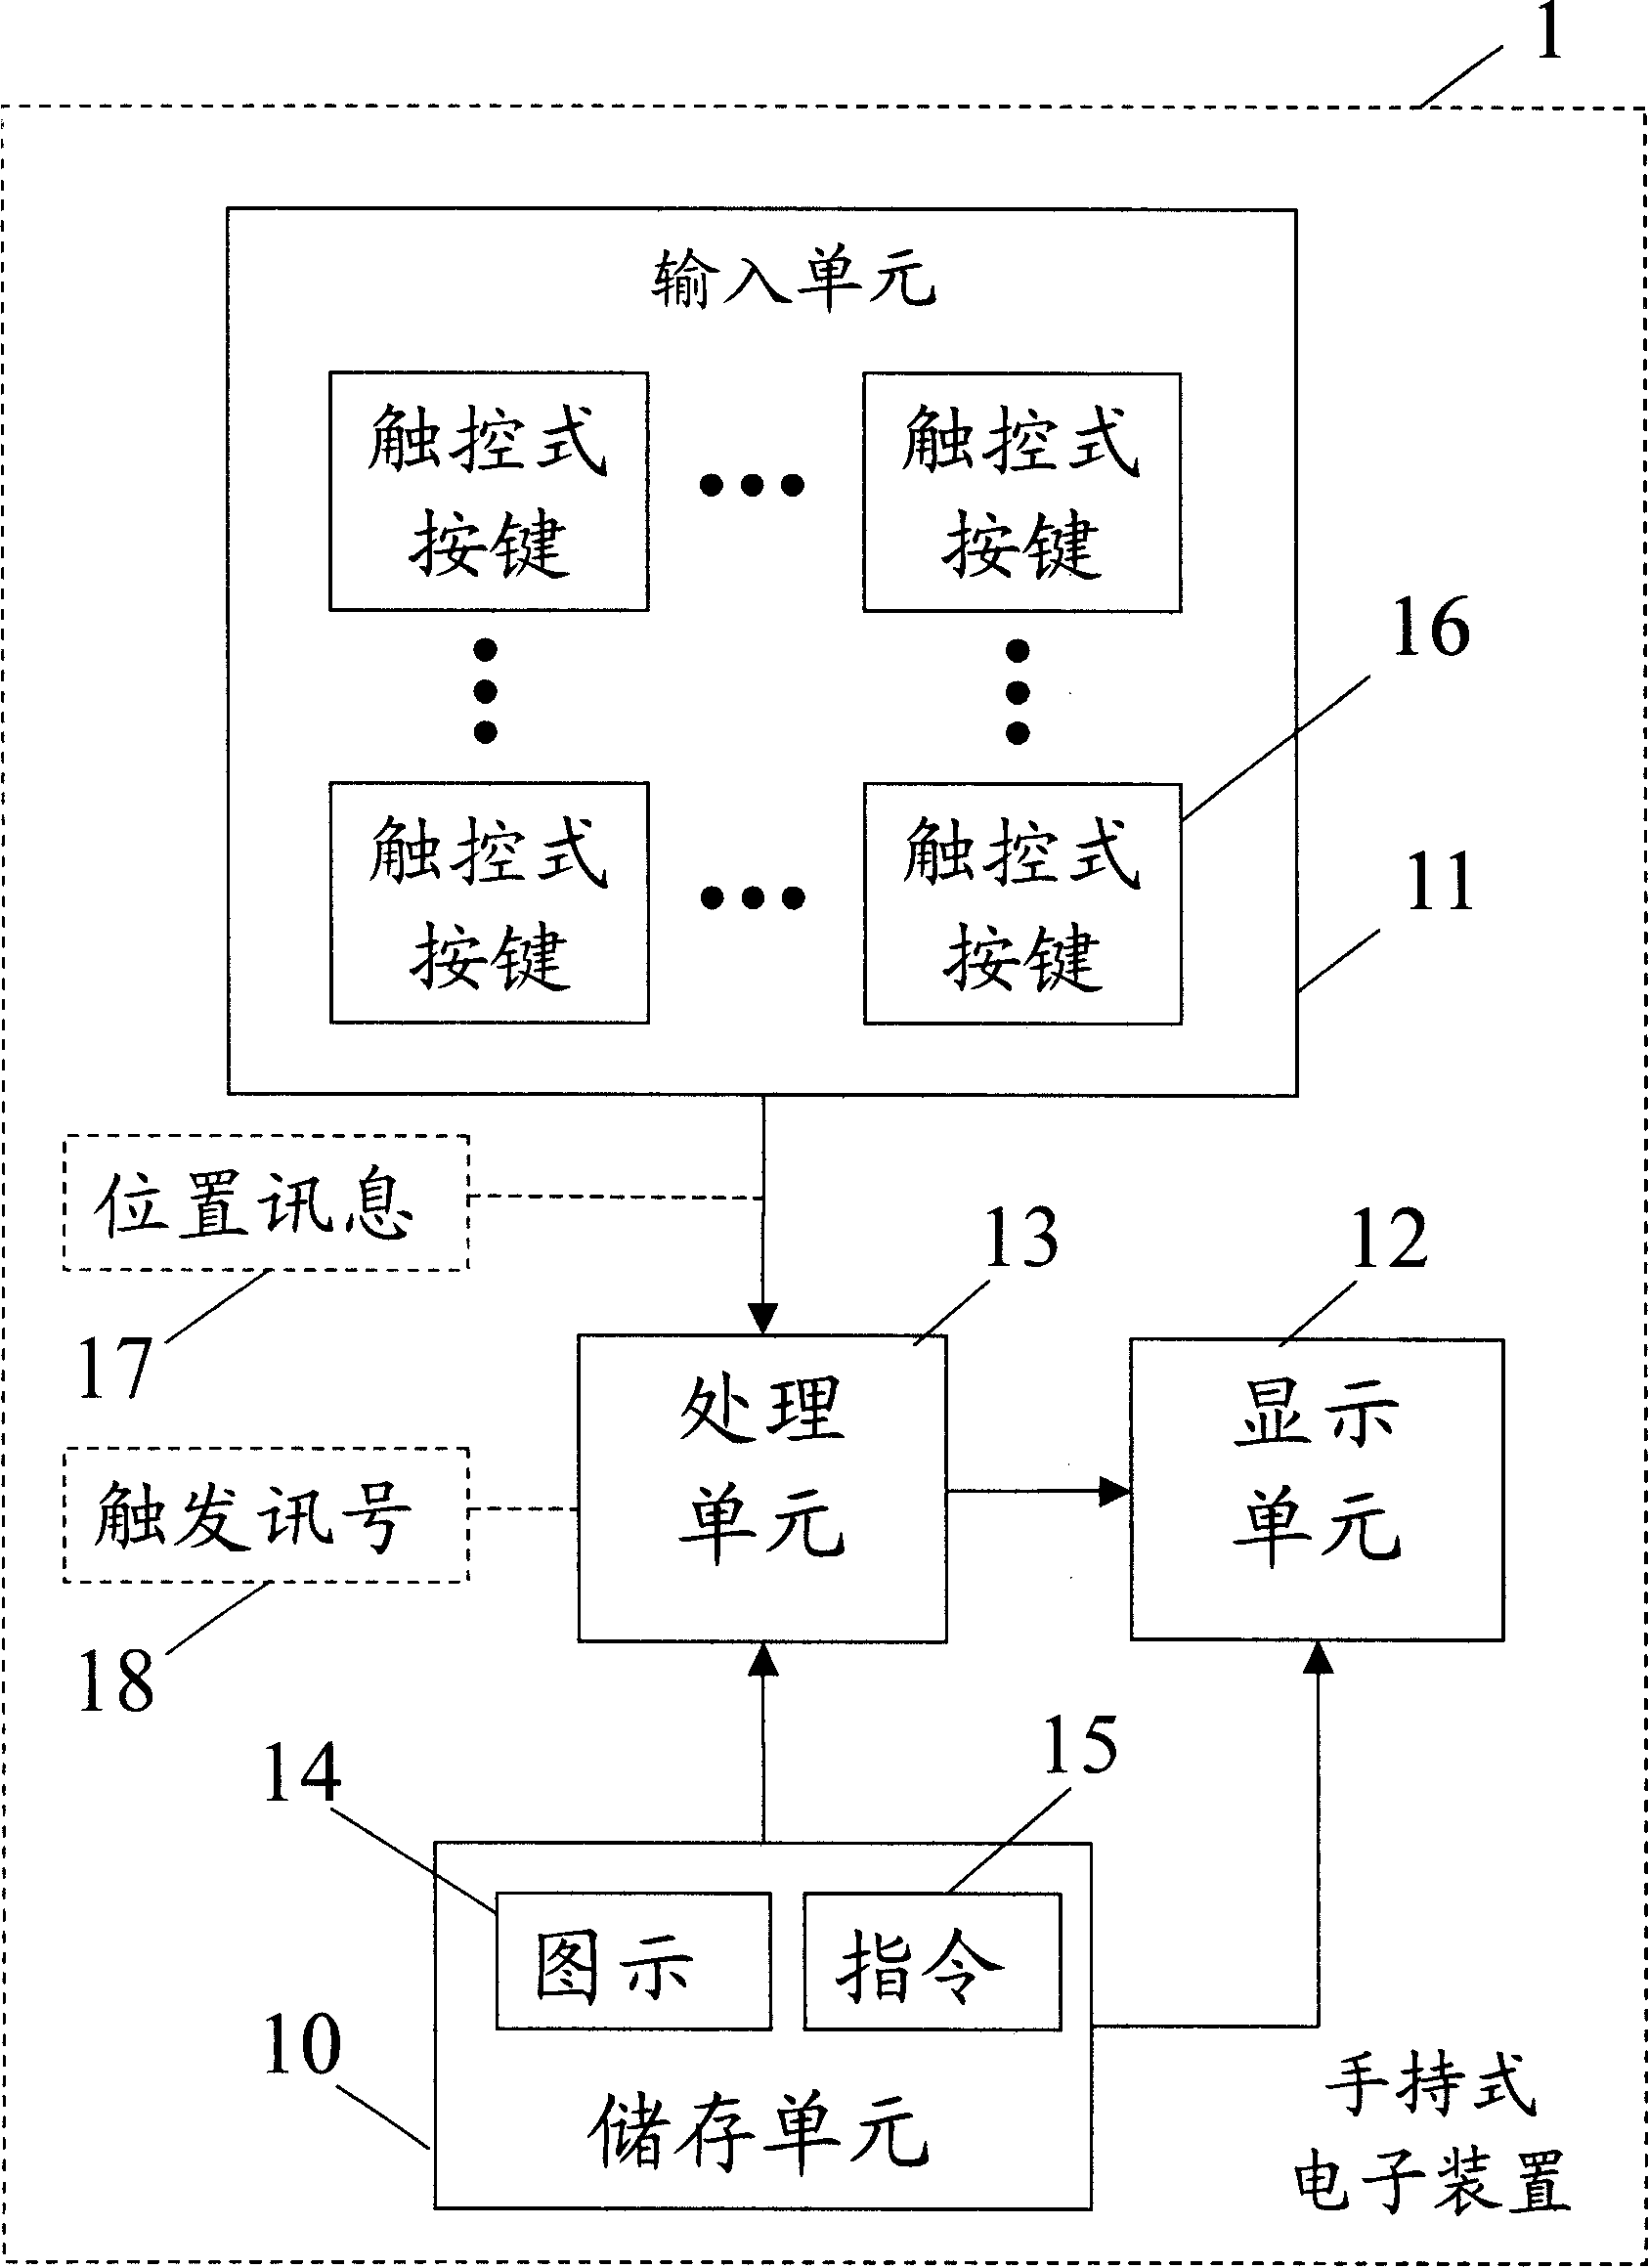 Hand-held electronic device, its input system